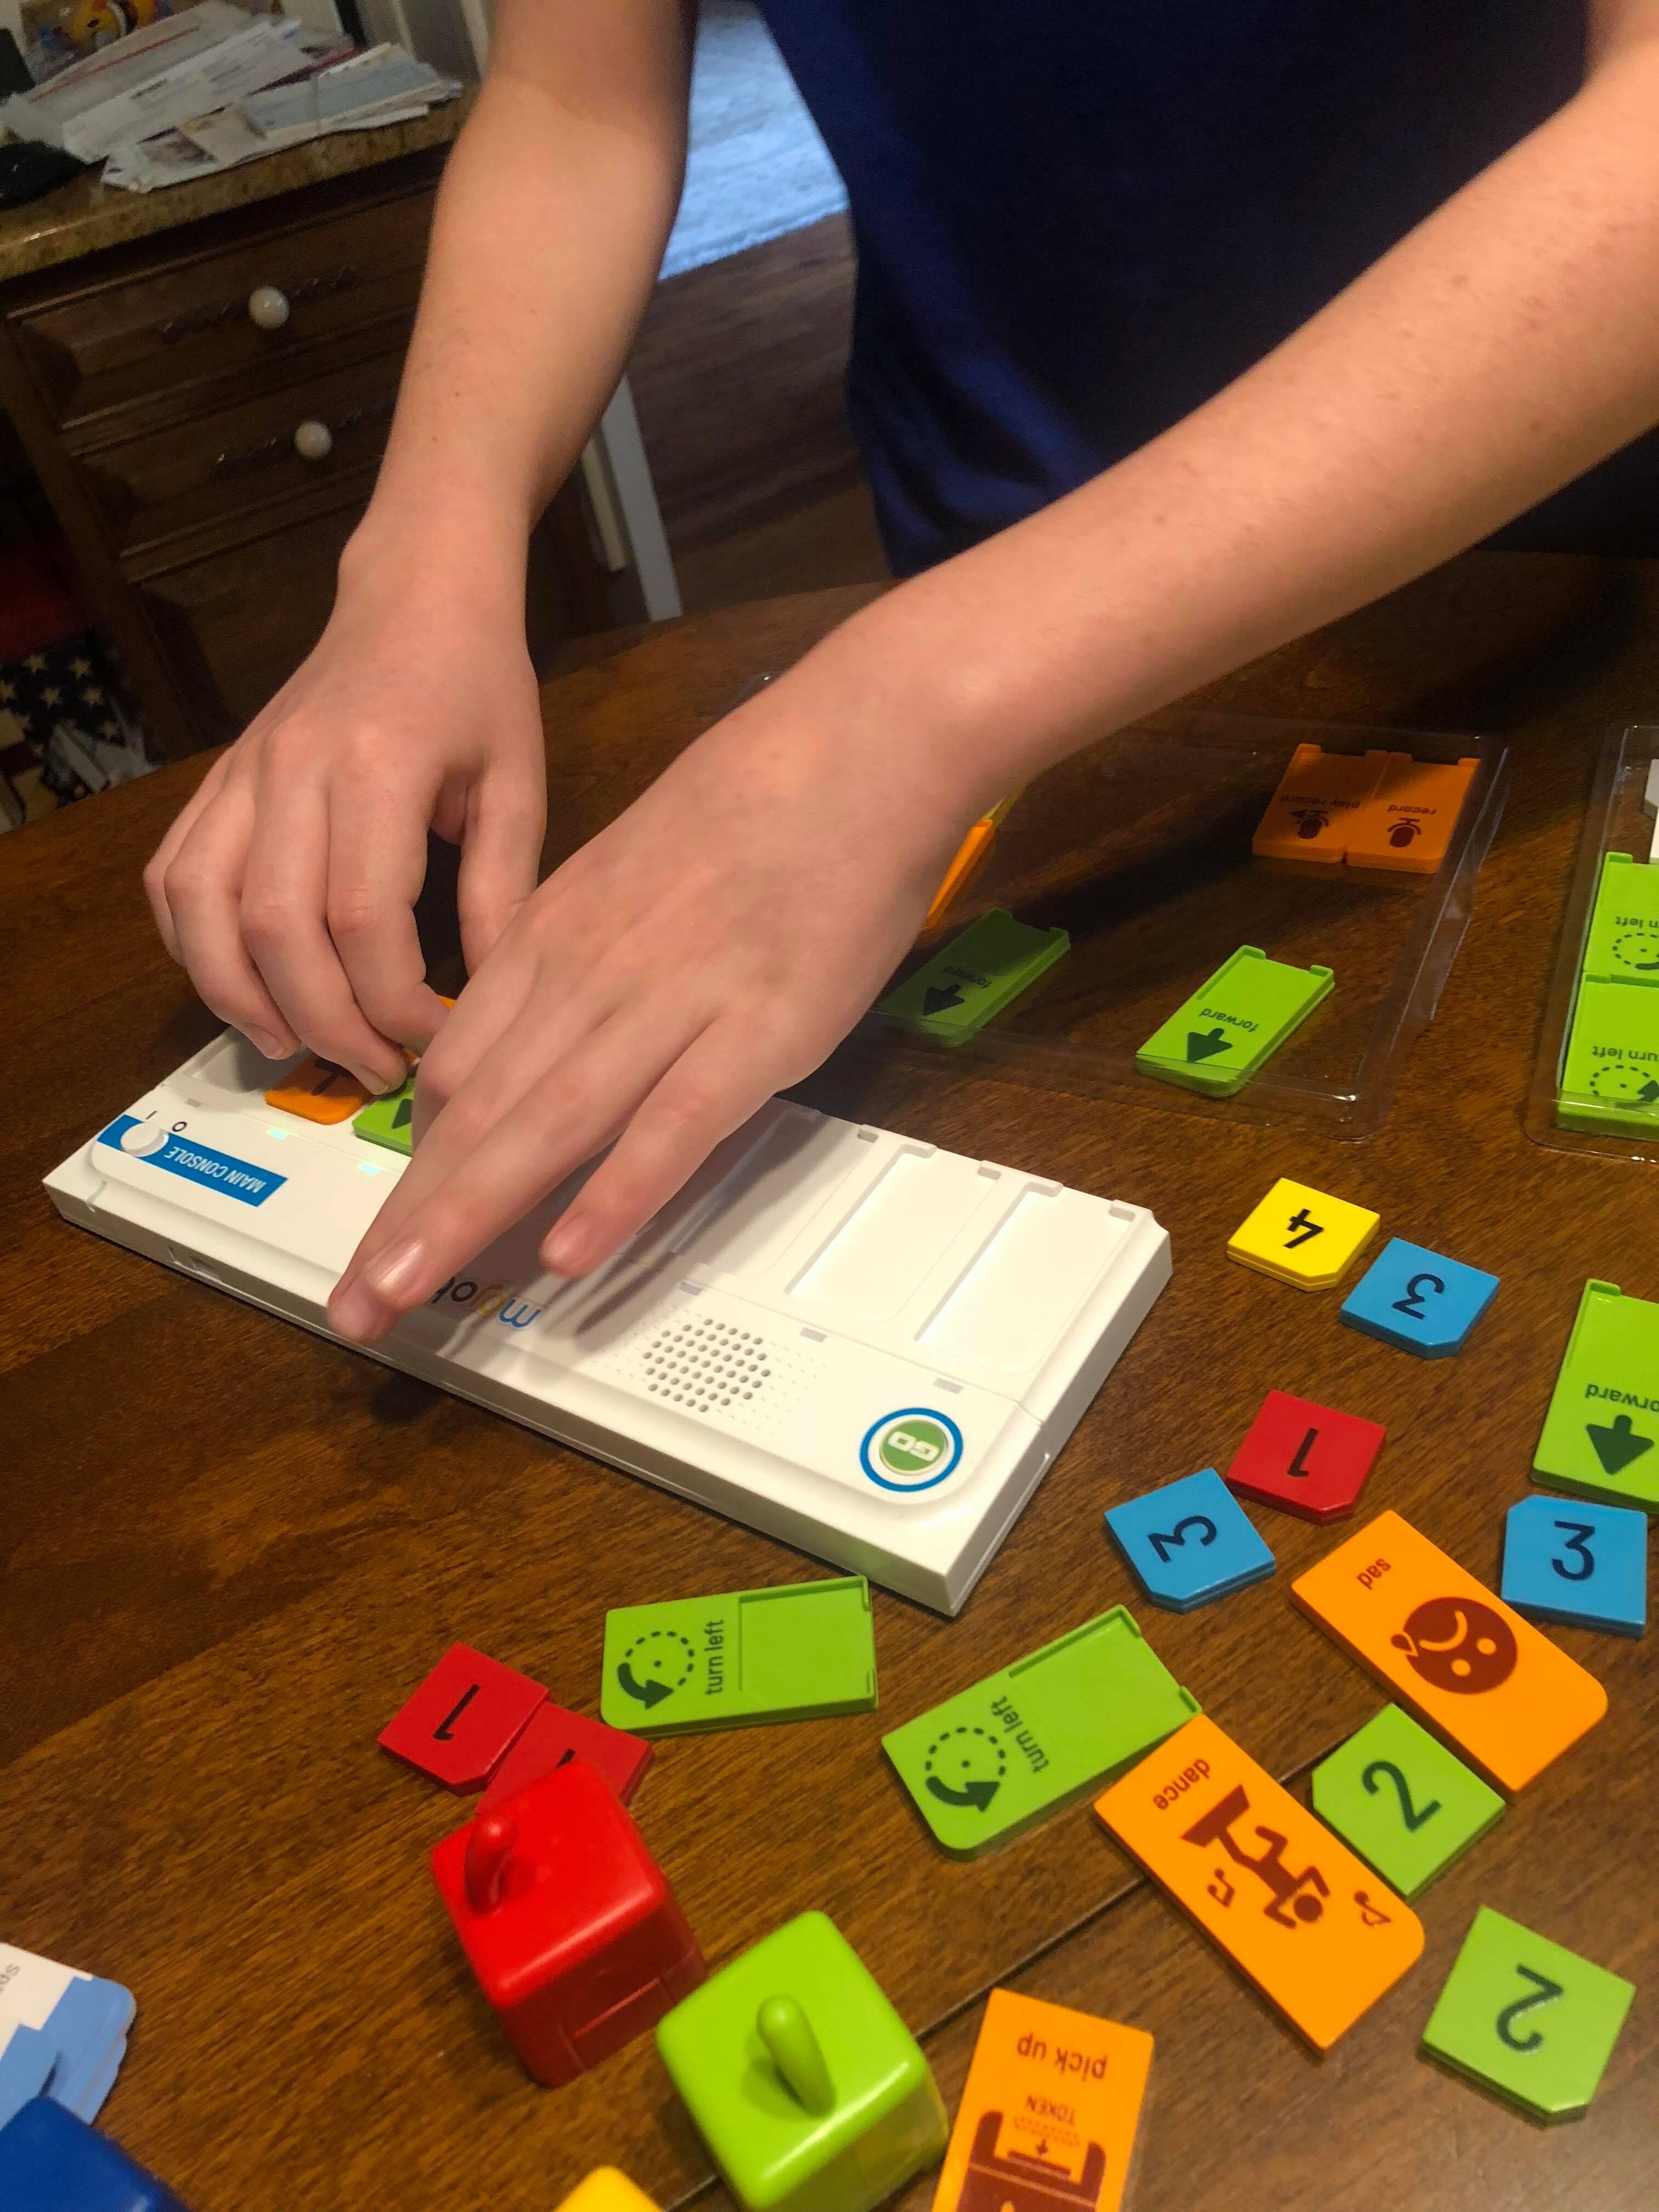 Mojobot is a fun and entertaining tangible coding robot and board game that makes it easy and fun for kids and adults to learn coding.